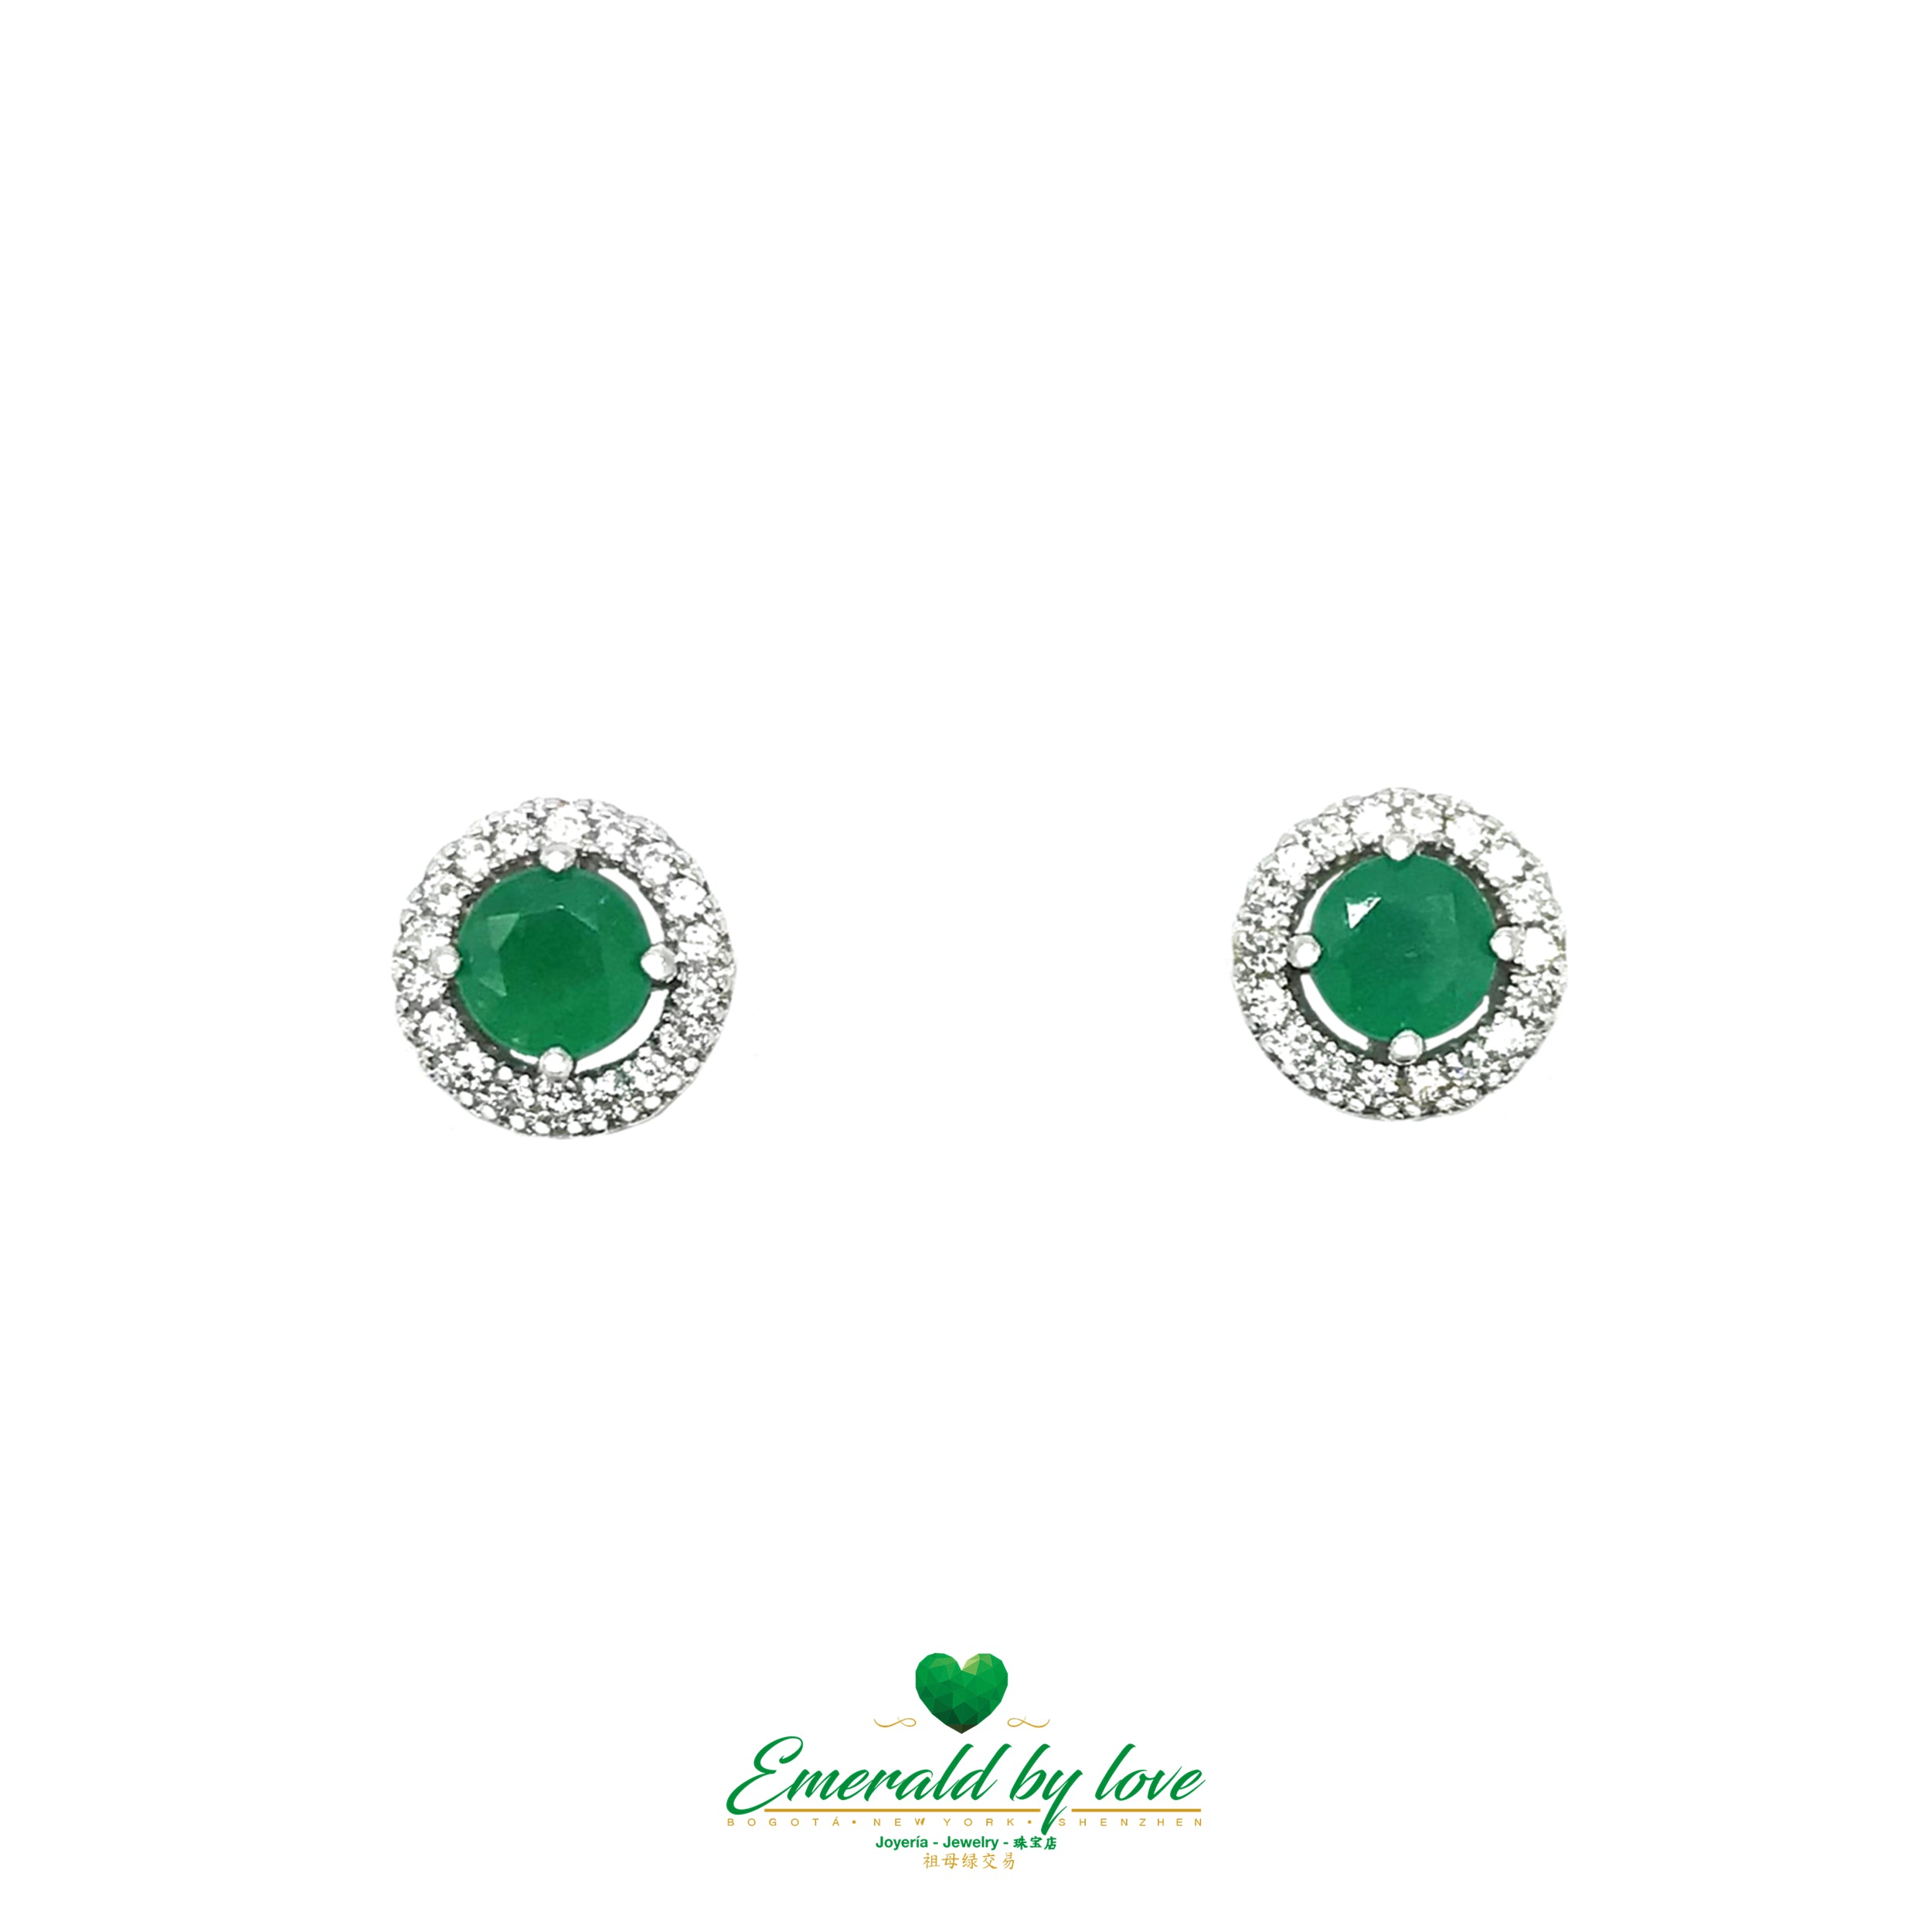 Sterling Silver Marquise Earrings with Round Central Emerald in Four-Prong Setting